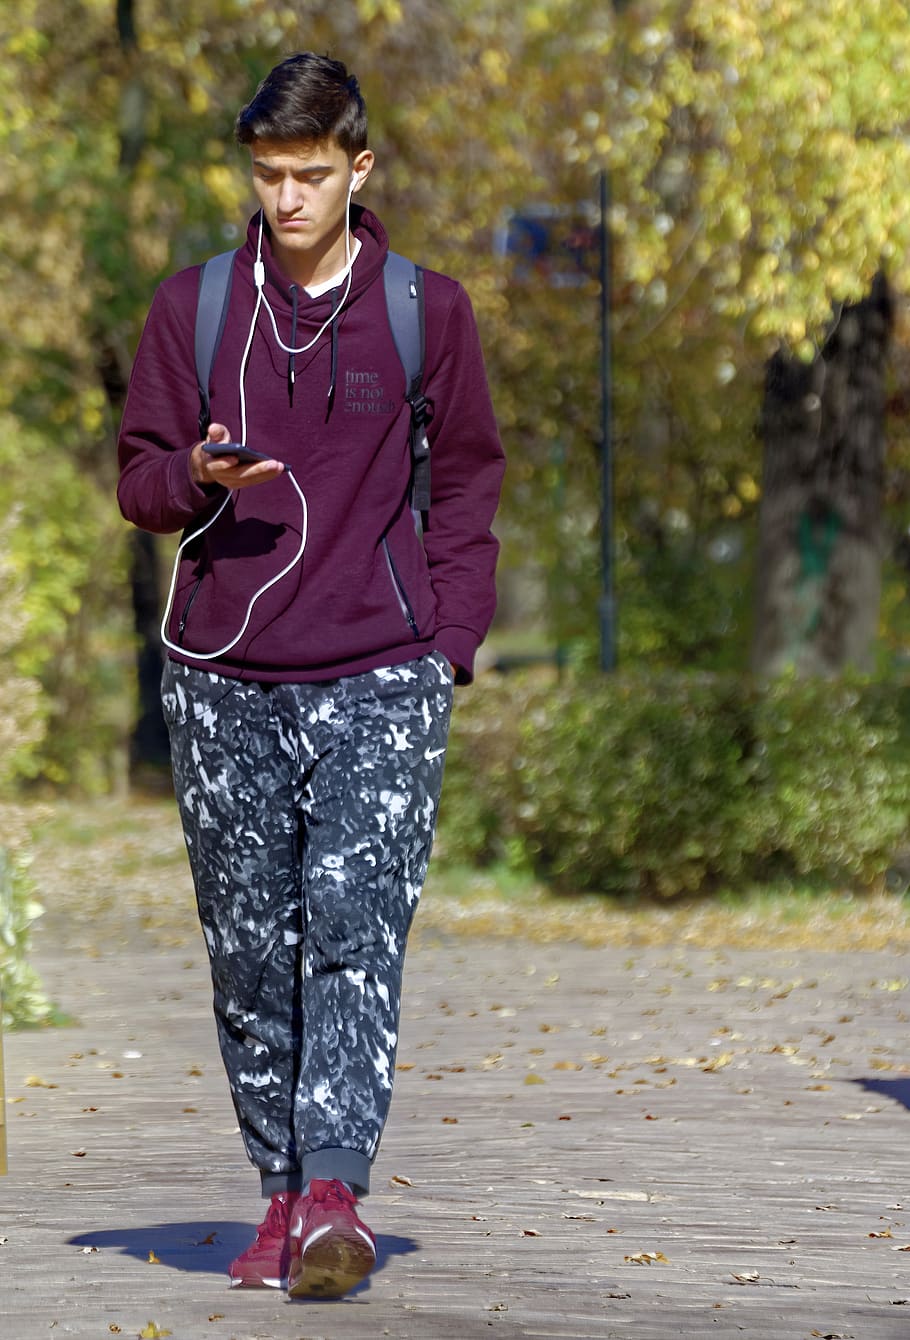 boy, young, person, adult, going, alley, park, listening to the, headphones, ear